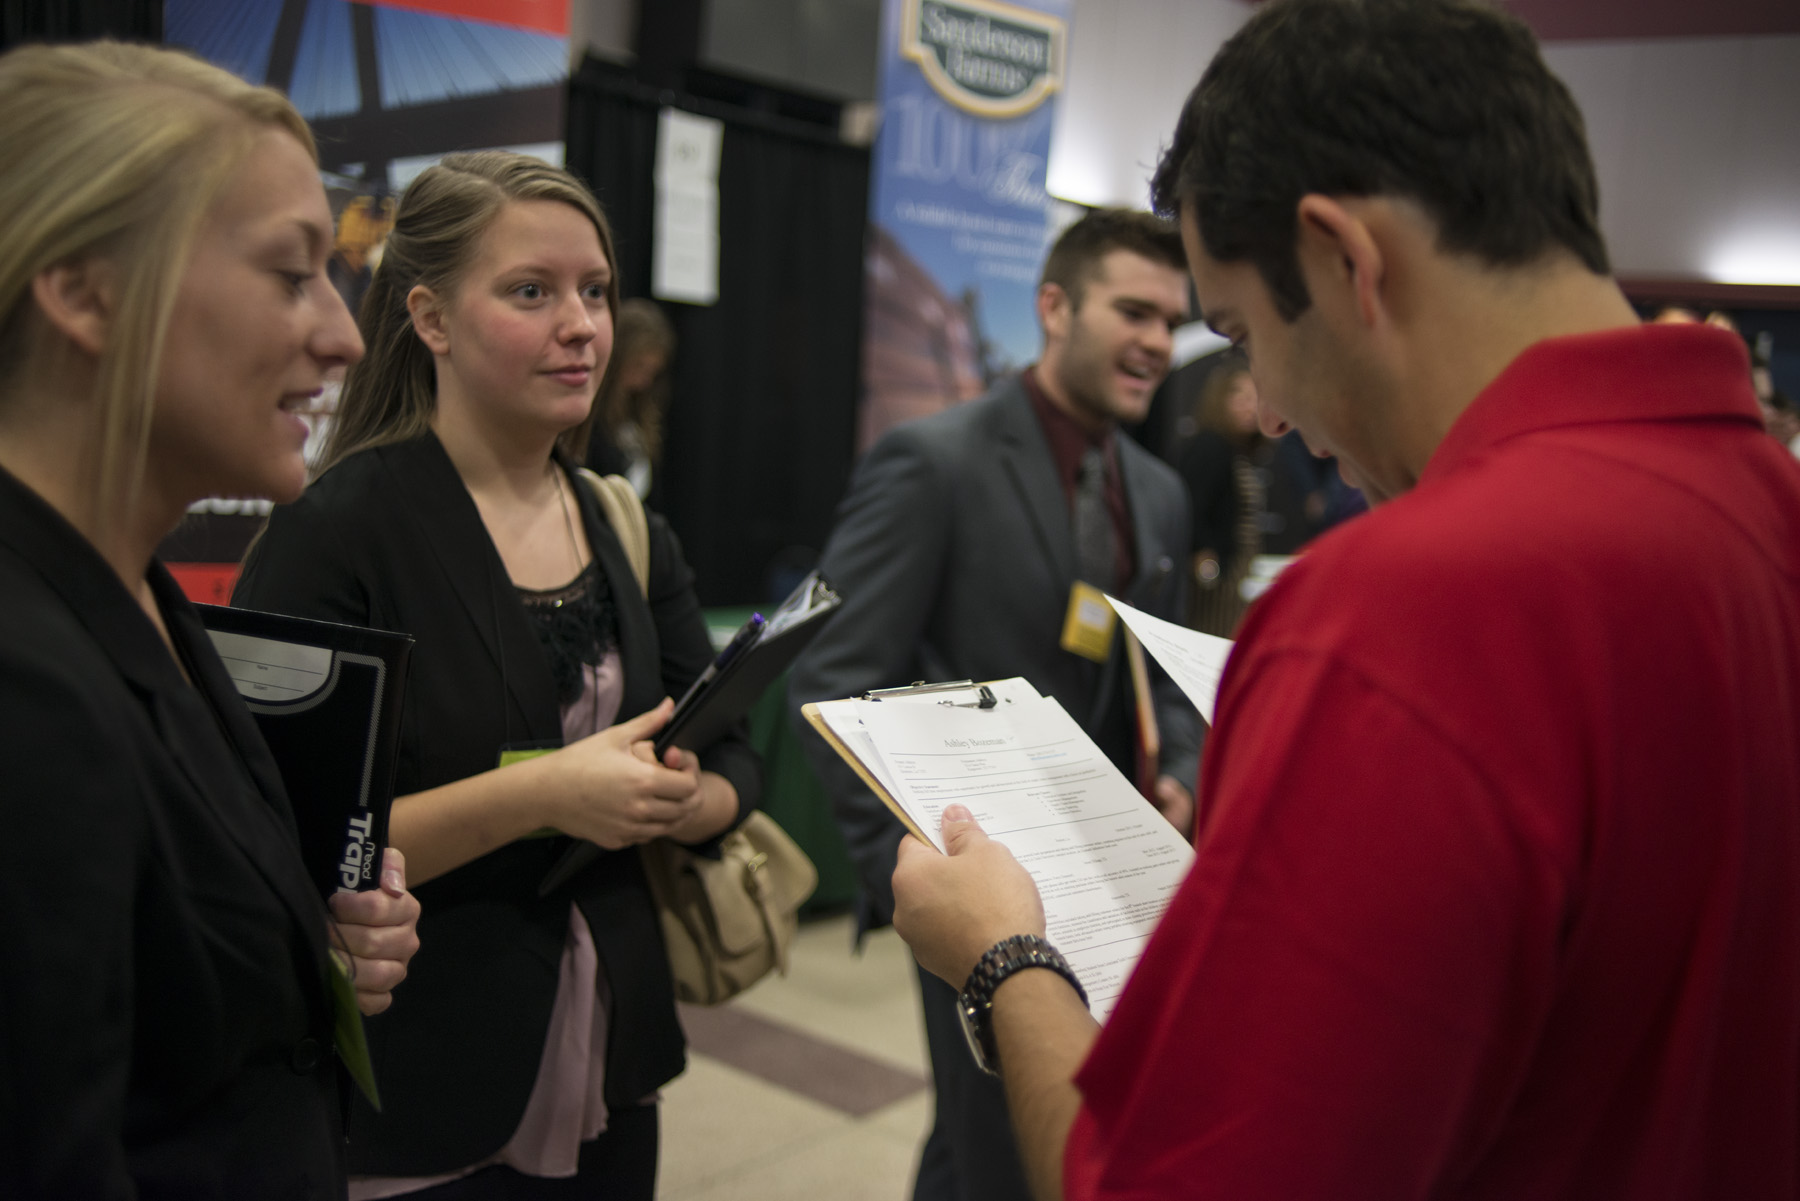 Supply chain management majors Kimberly Duck and Ashley Bozeman, along with Ronnie Huckaby Jr. a mechanical engineering major, interview with Exxon/Mobil representatives.